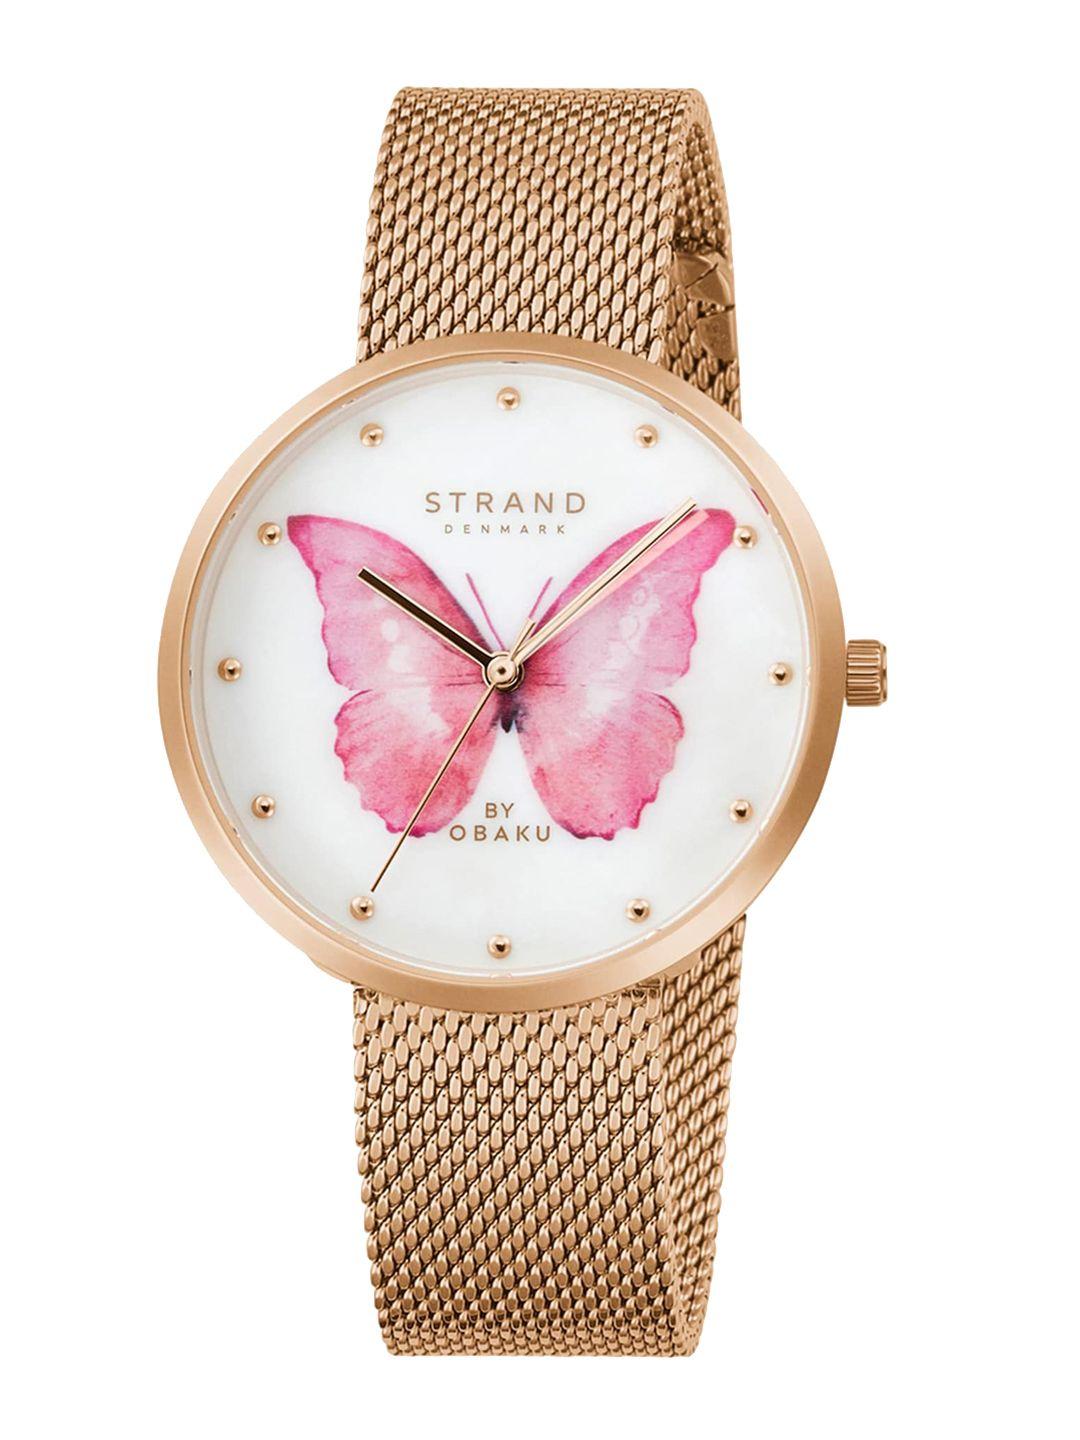 strand-by-obaku-women-white-brass-dial-&-rose-gold-toned-straps-watch-s700lxvwmv-dbp